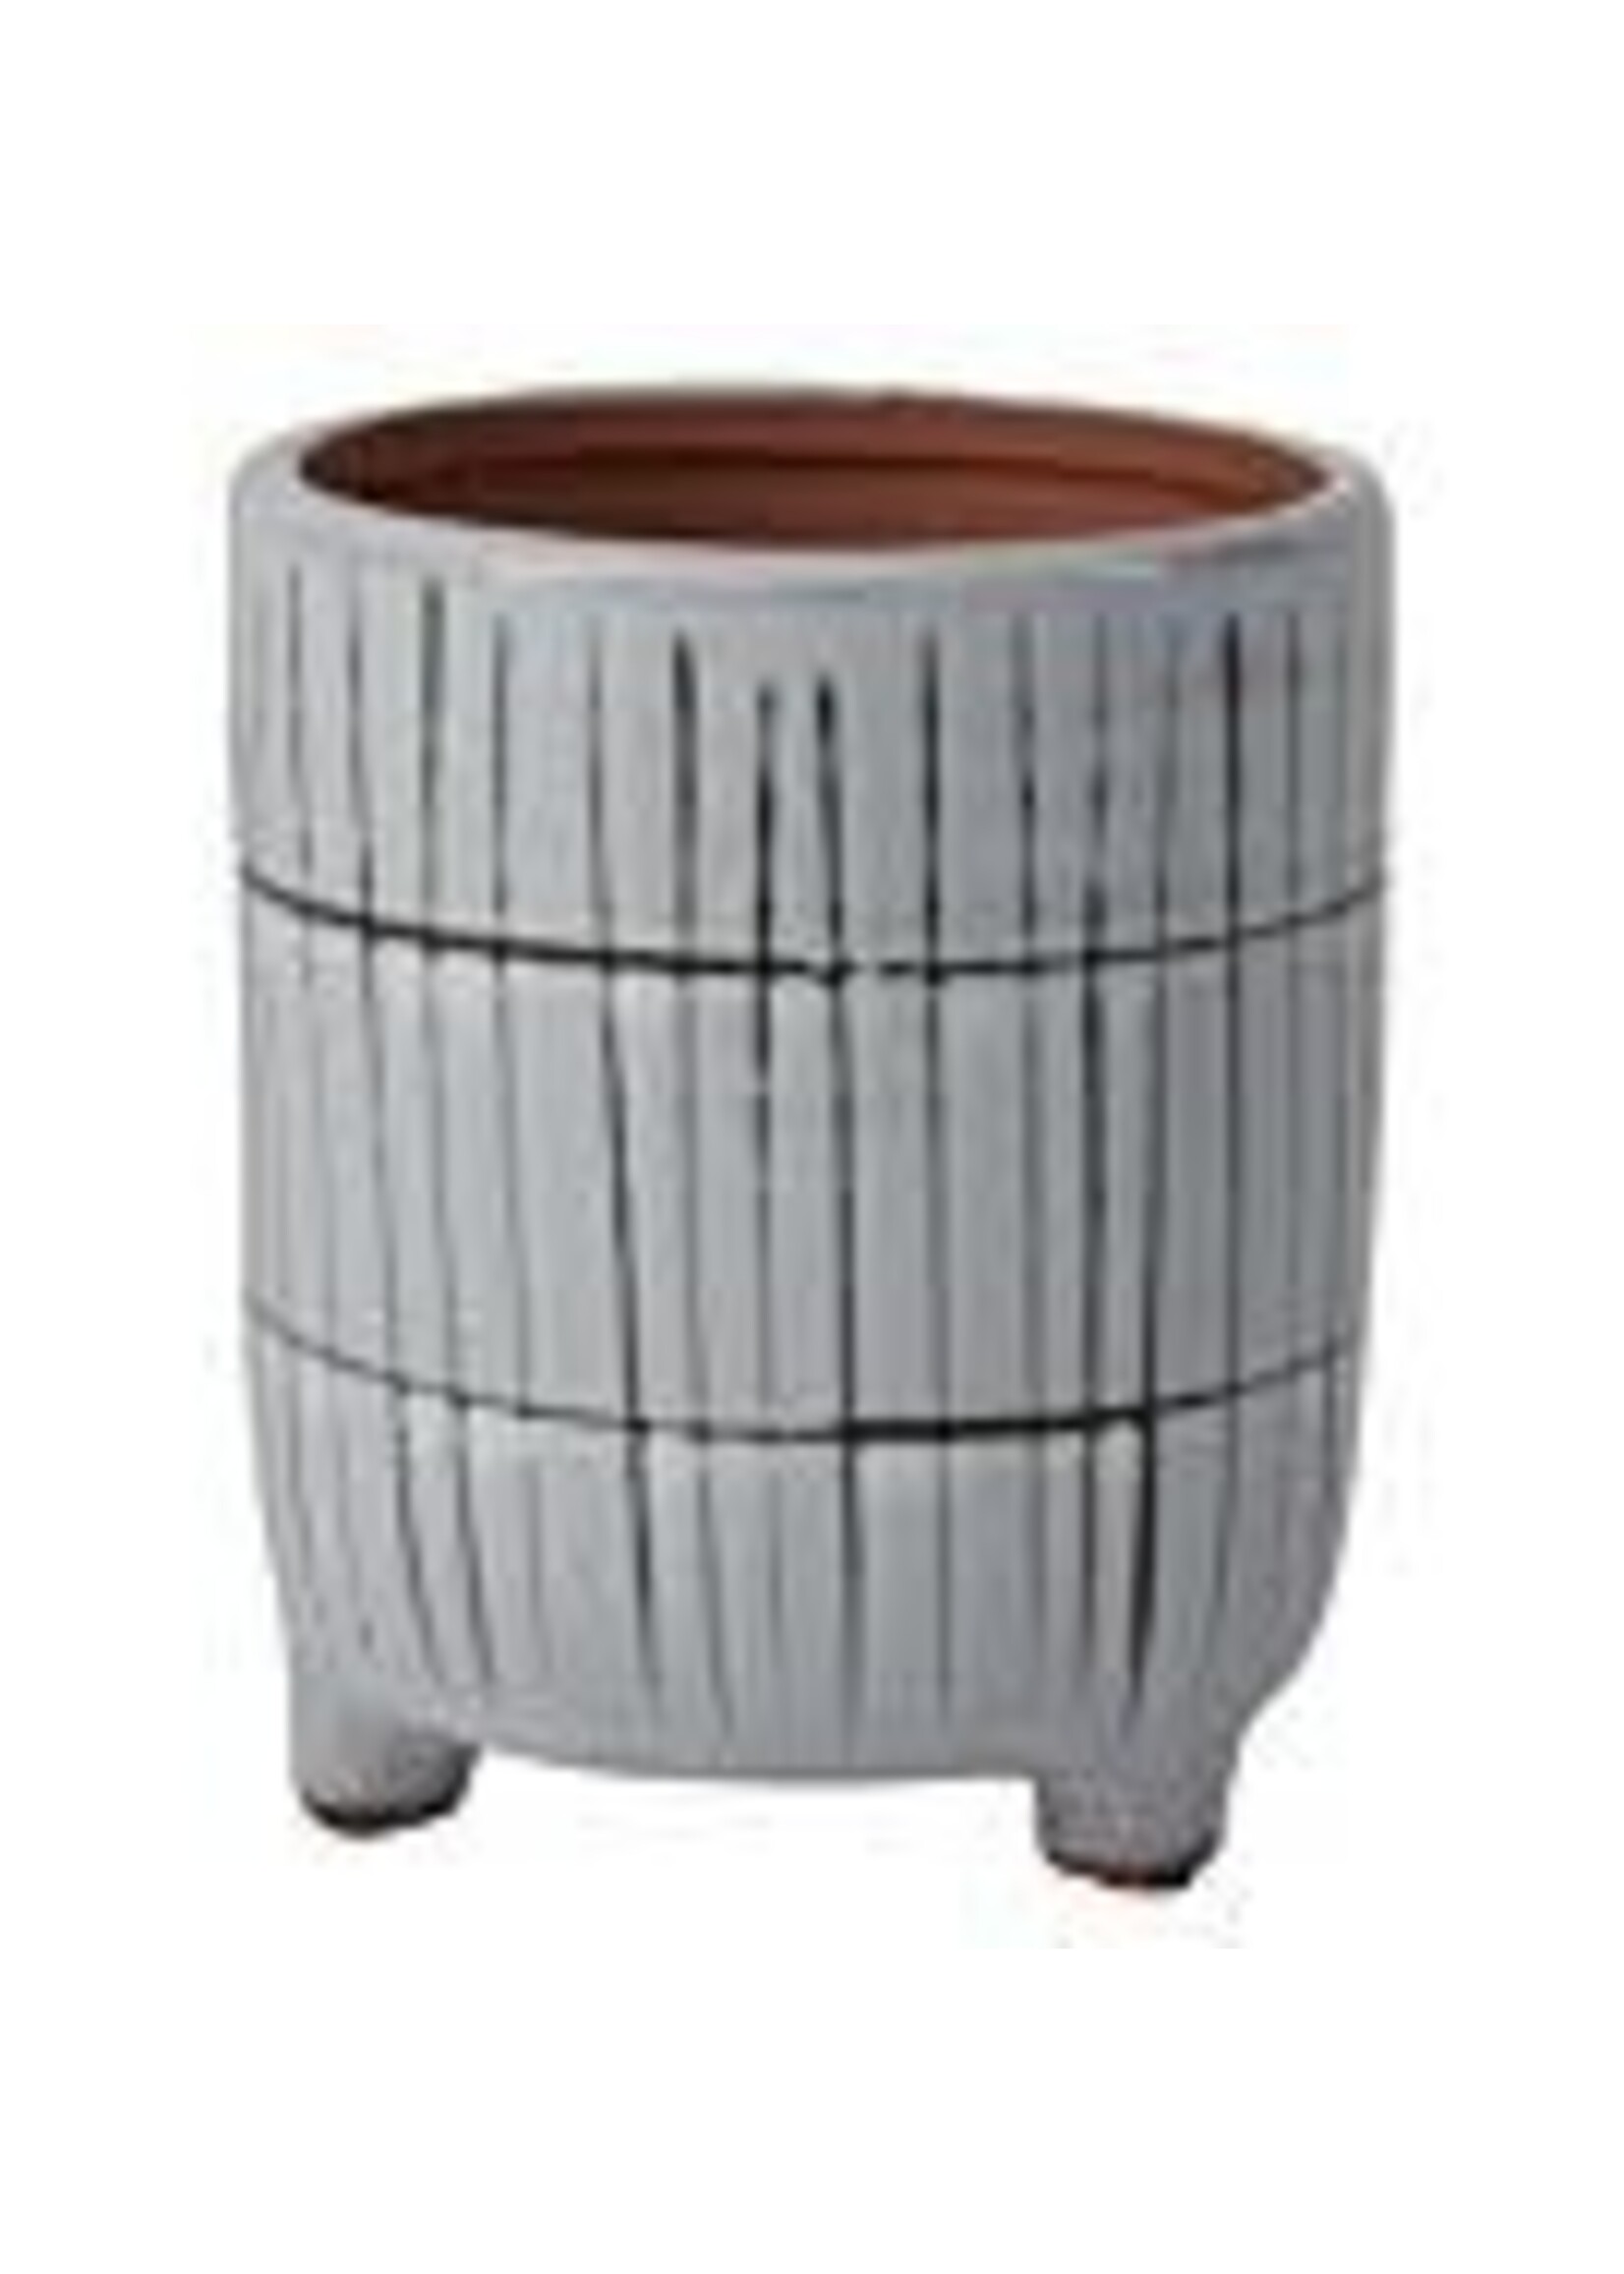 BRAY FOOTED POT 6.75"X 8.25"